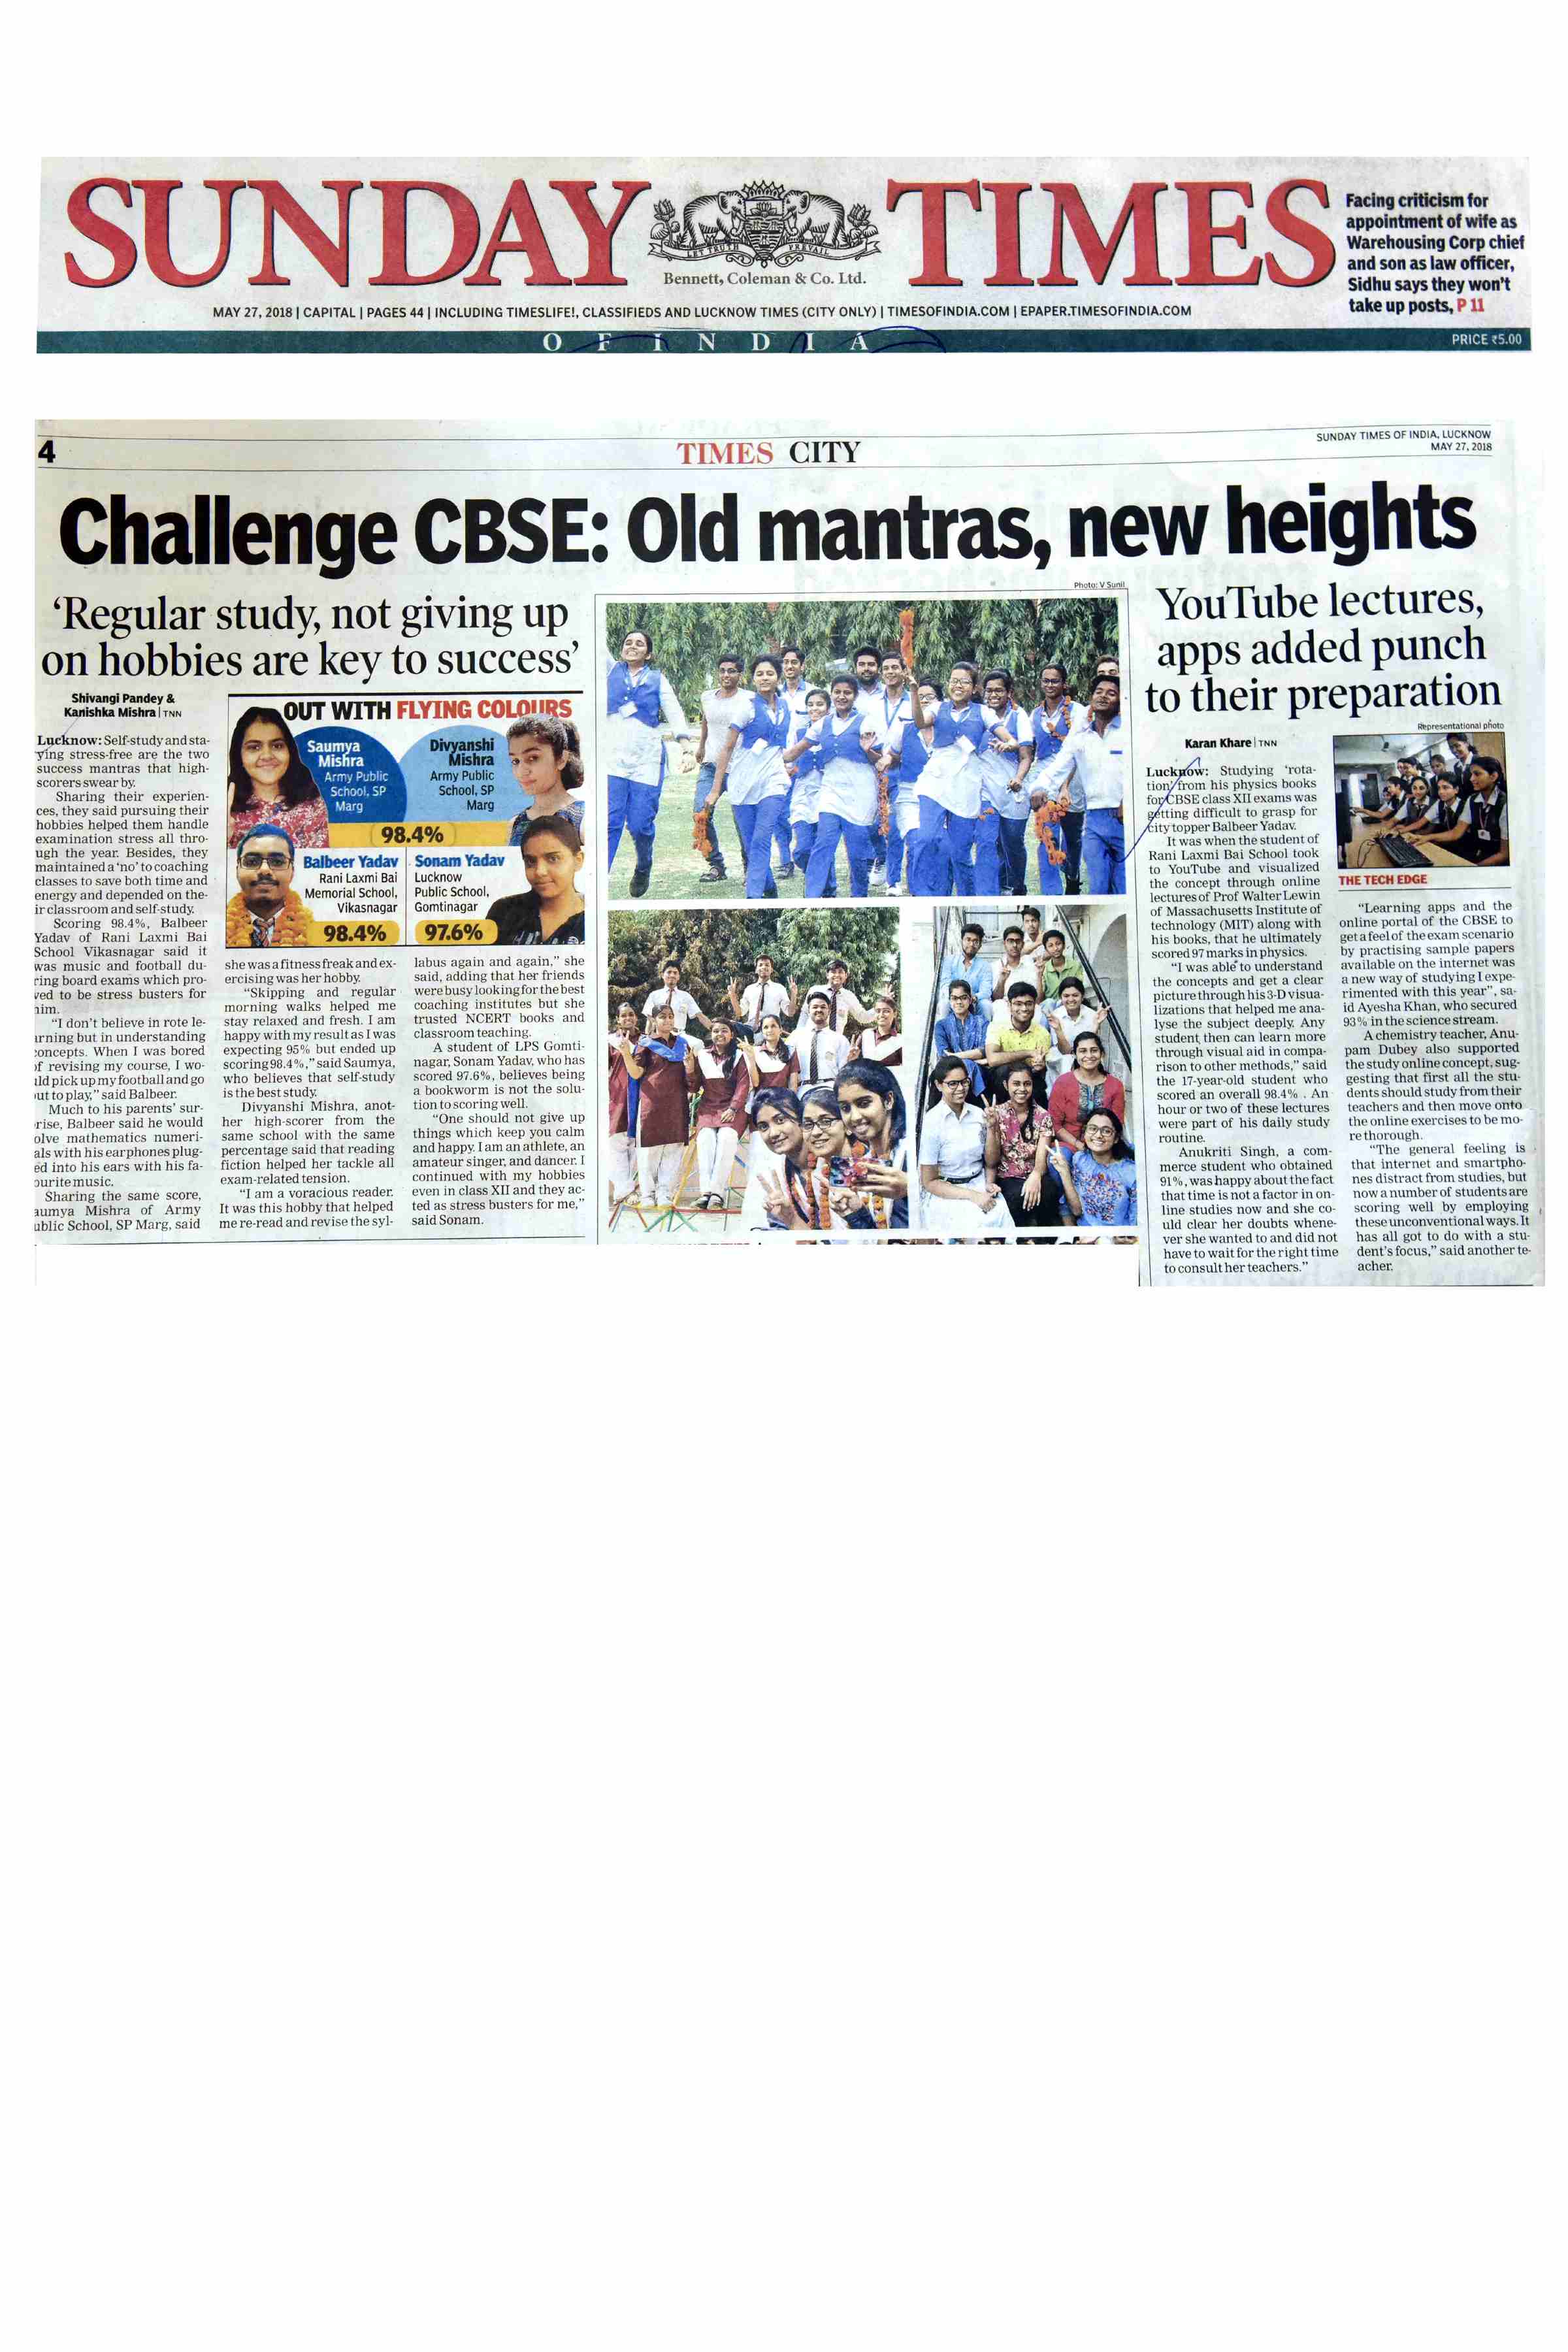 CBSE RESULTS 27th MAY 2018-TIMES OF INDIA SUNDAY TIMES PAGE 4